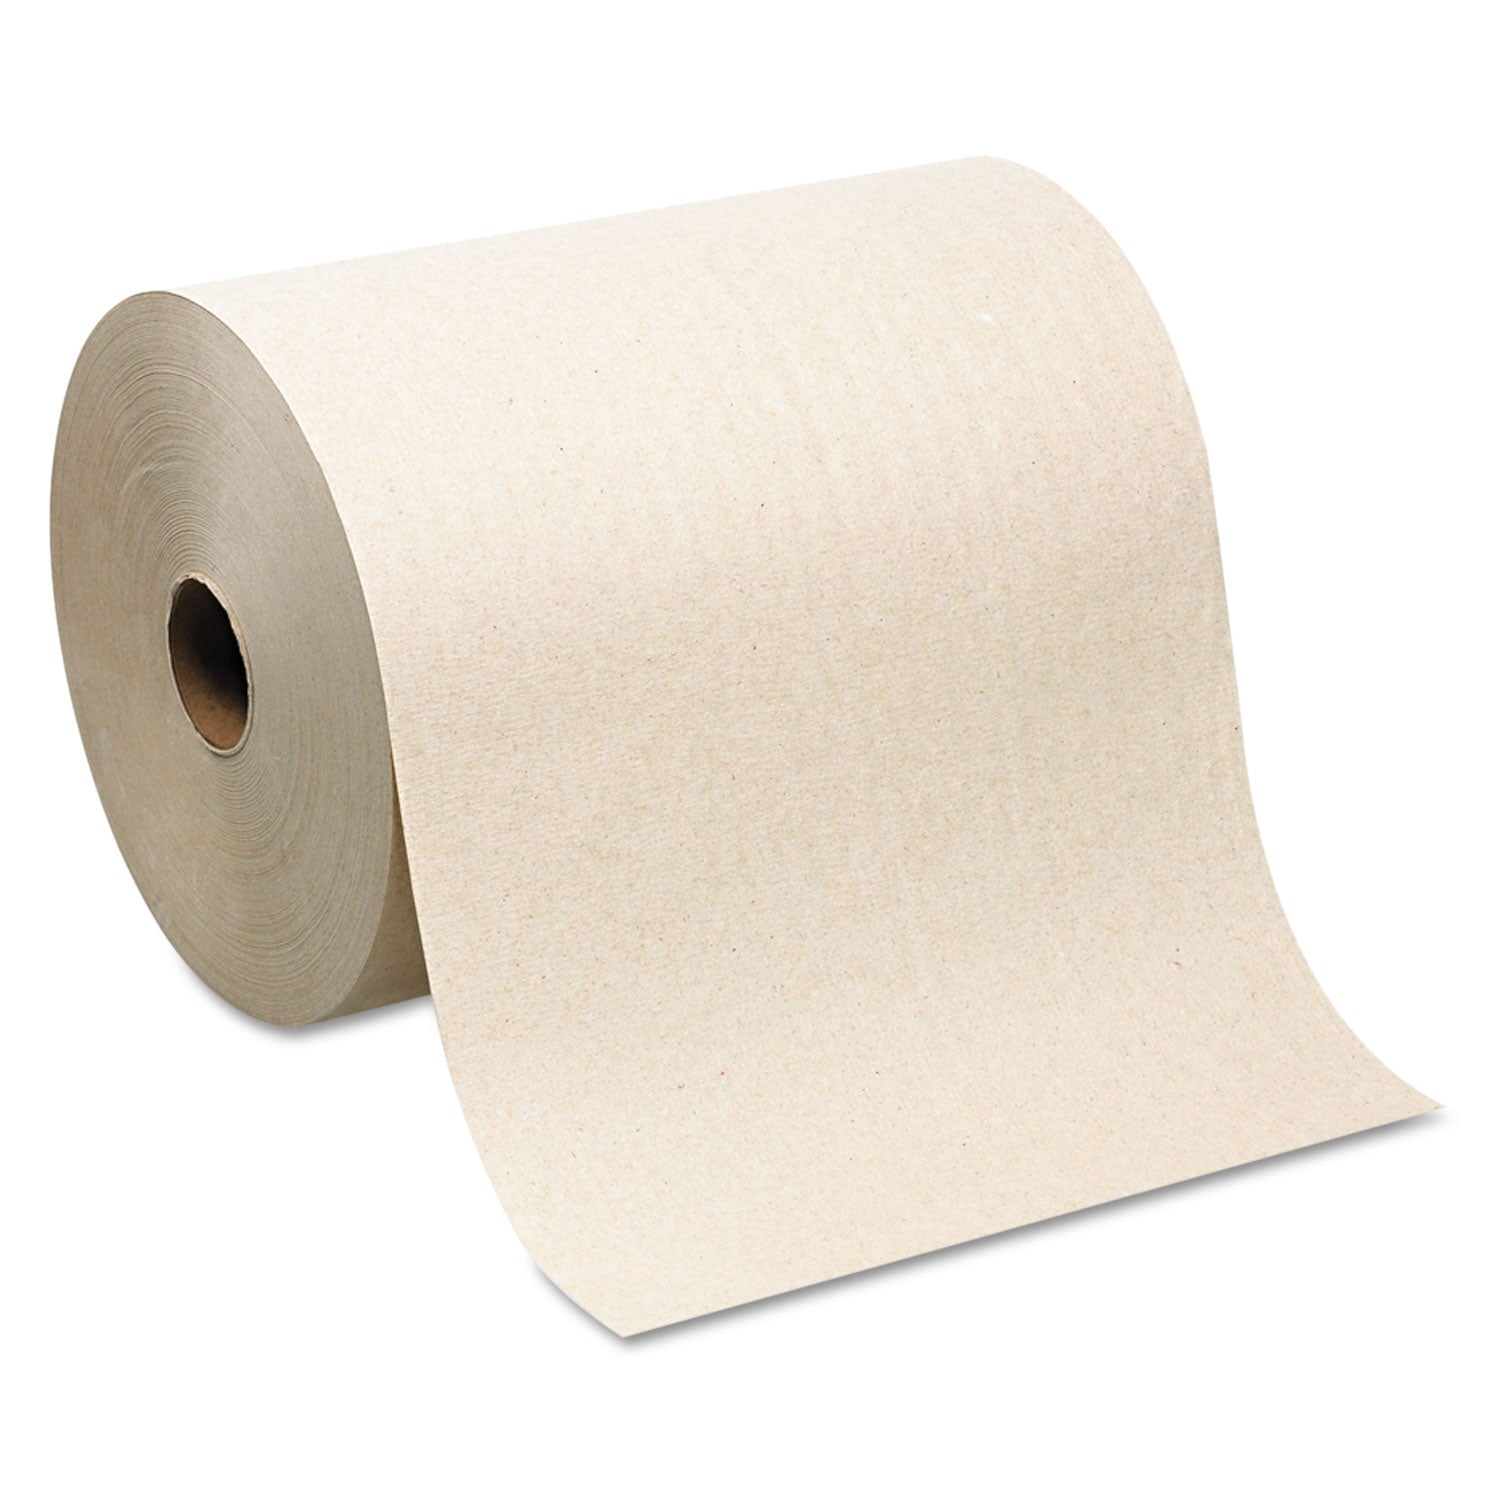 Hardwound Roll Paper Towel, Nonperforated, 1-Ply, 7.87" x 1,000 ft, Brown, 6 Rolls/Carton - 